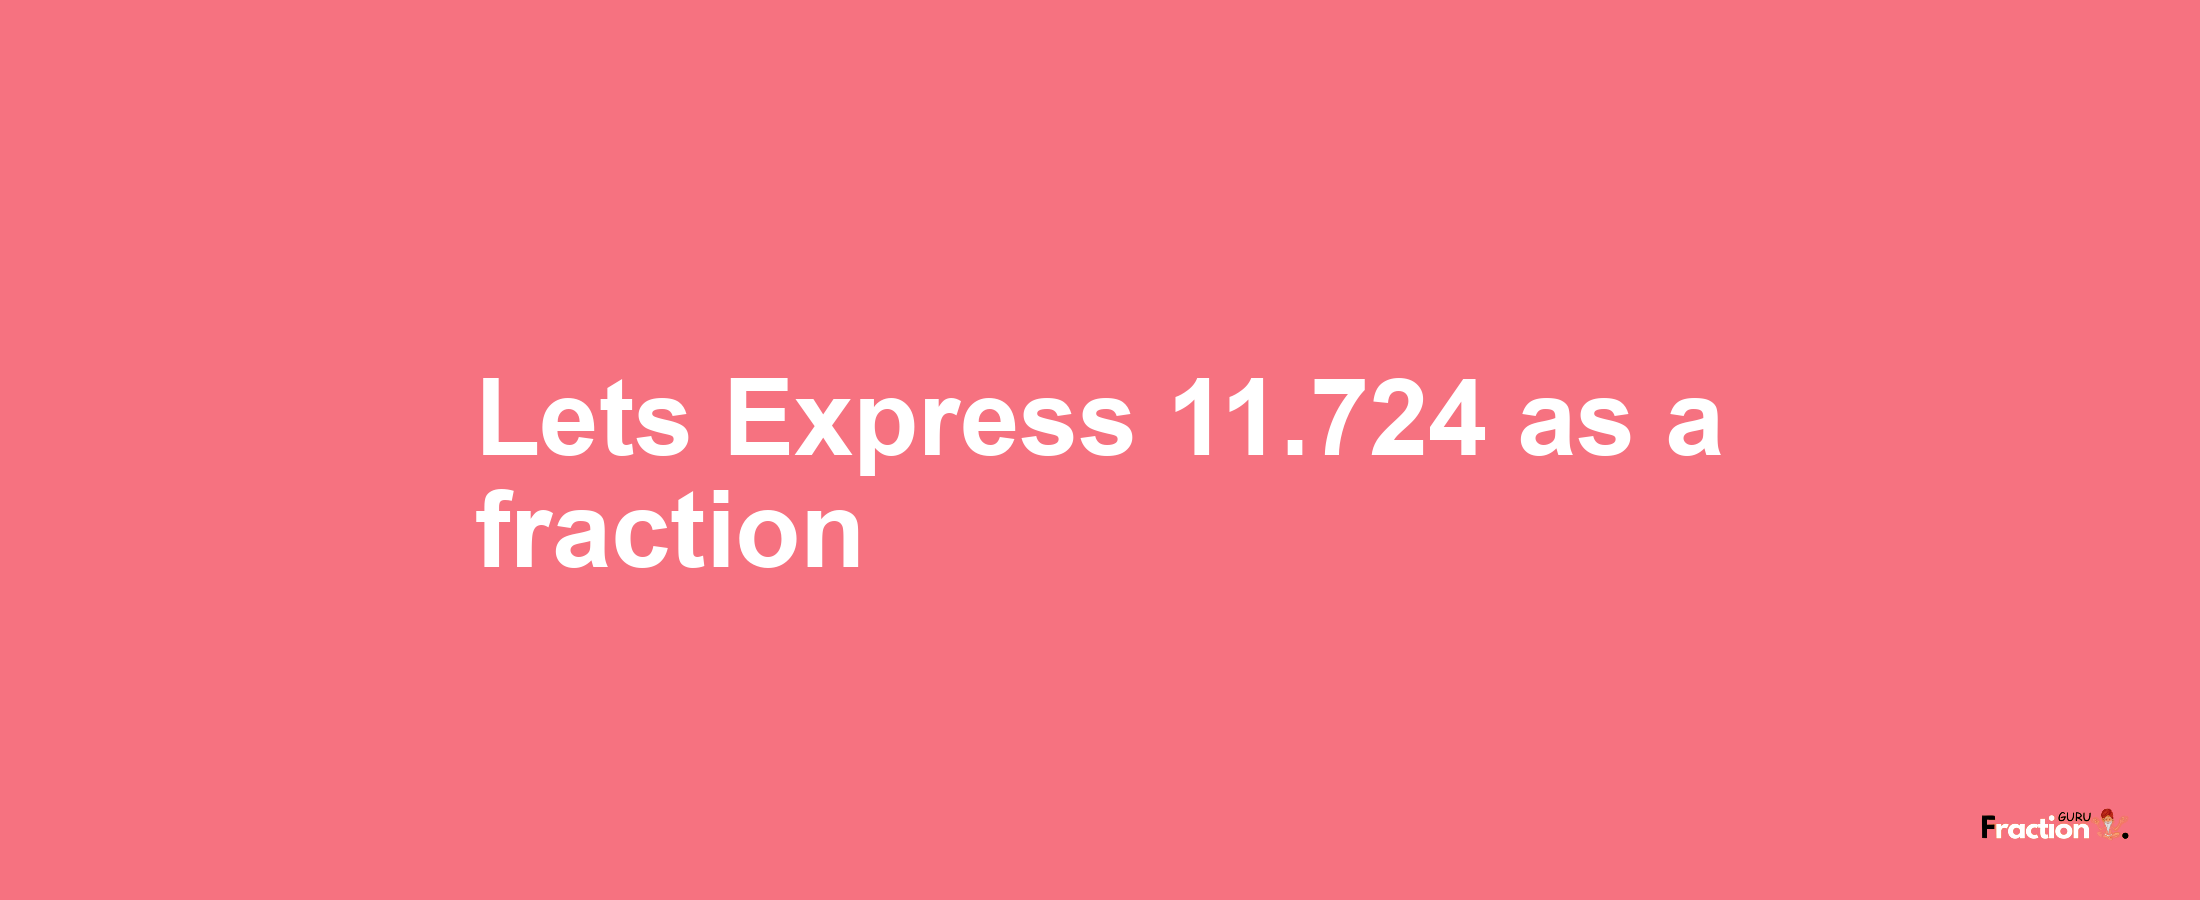 Lets Express 11.724 as afraction